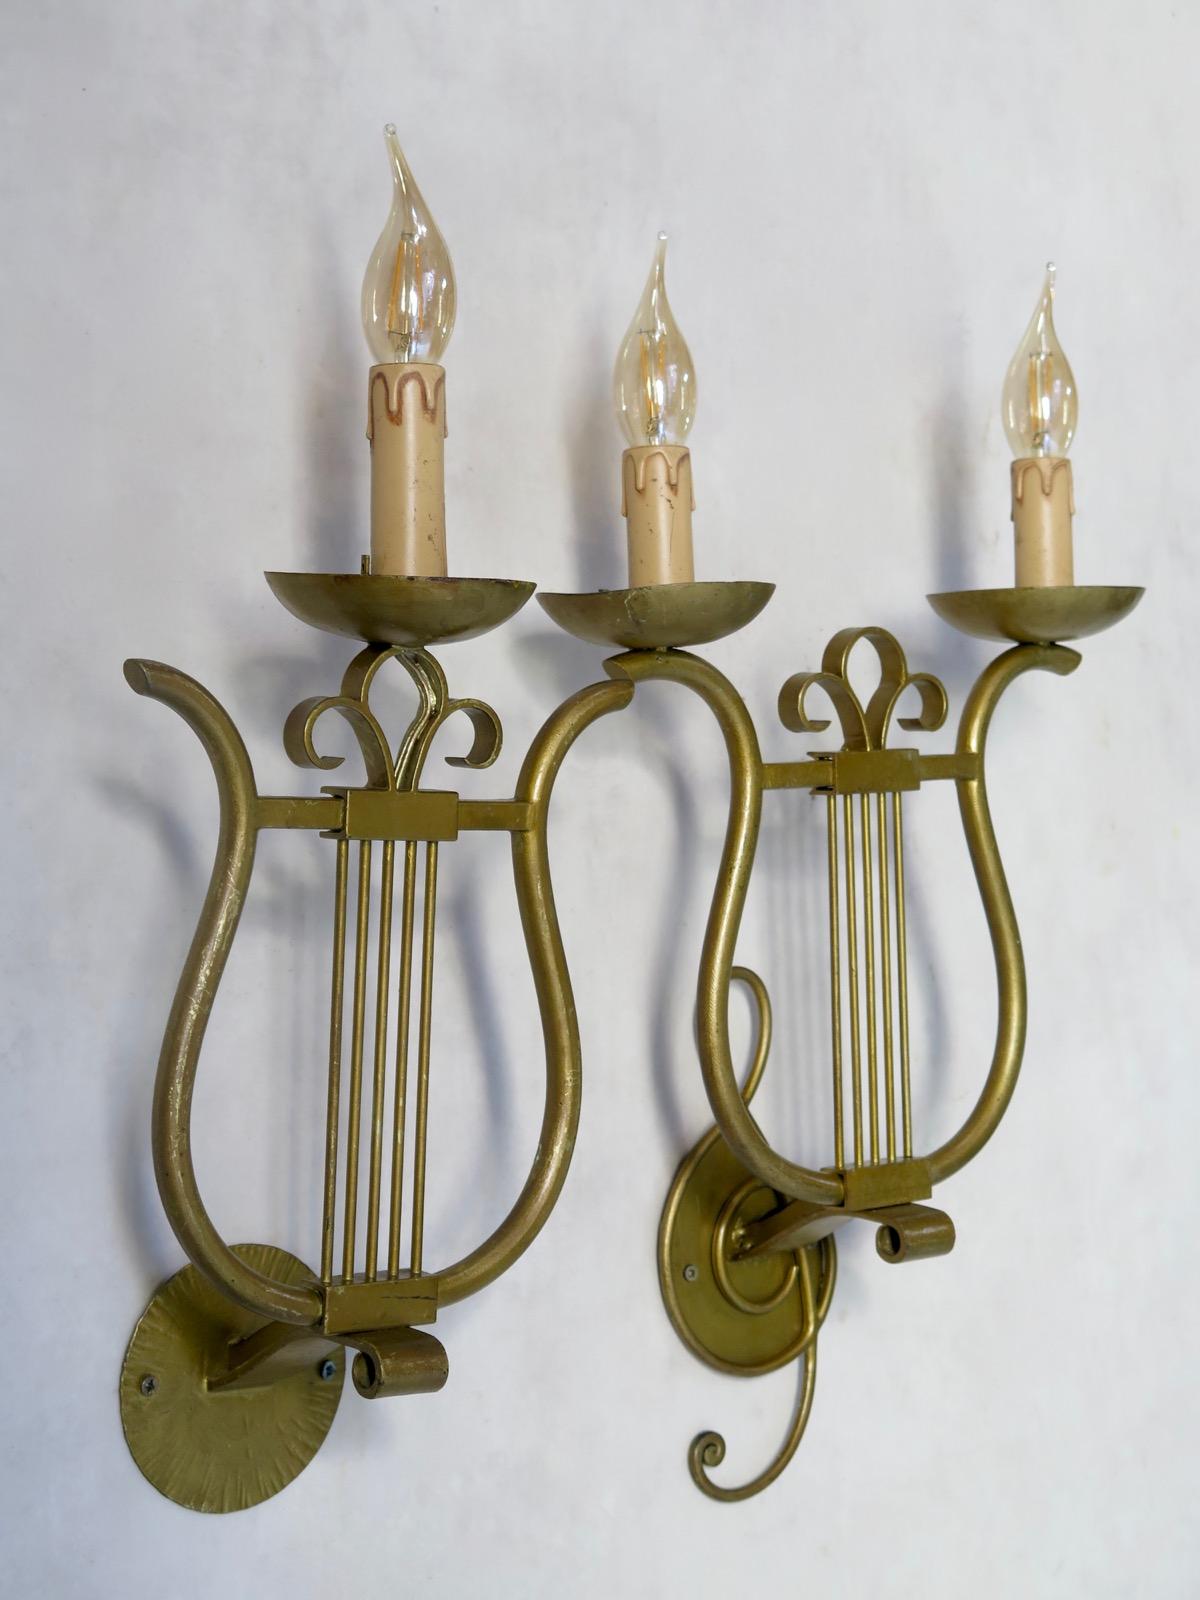 Set of four gilt iron wall lights shaped like lyres. There are two larger ones, with two lights each, and a treble clef. And two smaller, single light ones.

Dimensions provided below are for the larger sconces. The smaller ones